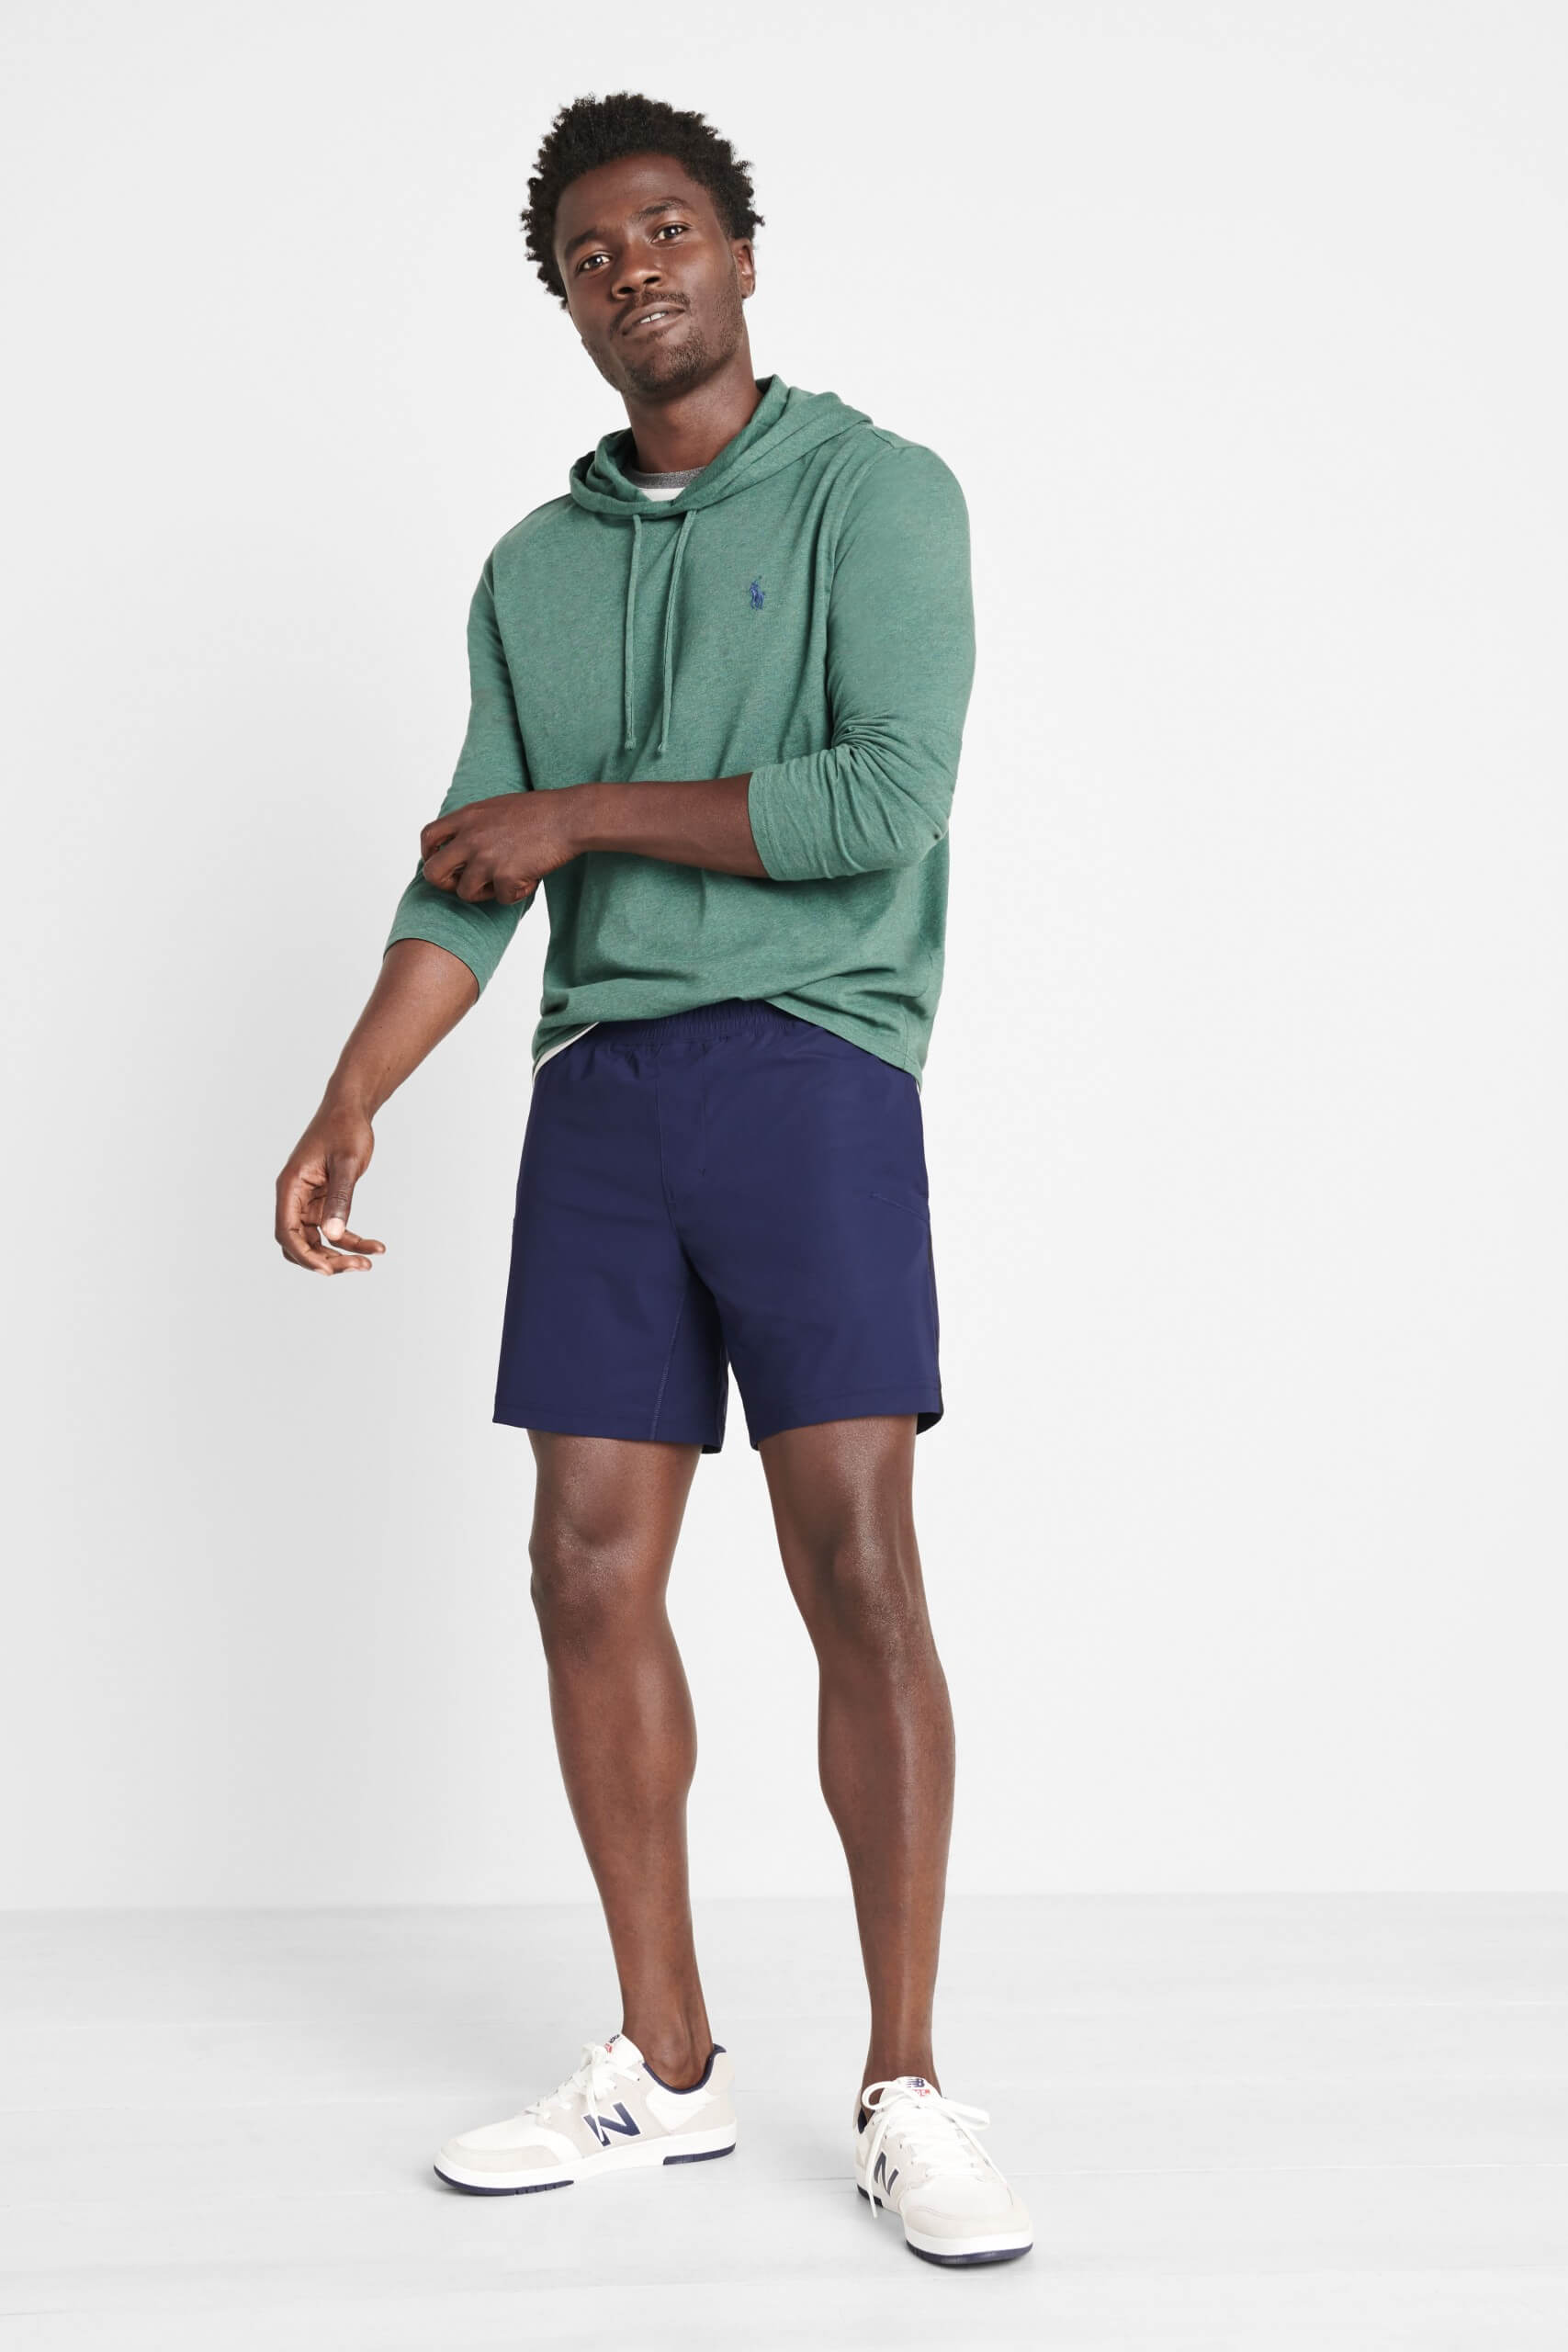 Is it okay for me, a guy, to wear shorts with a two inch inseam